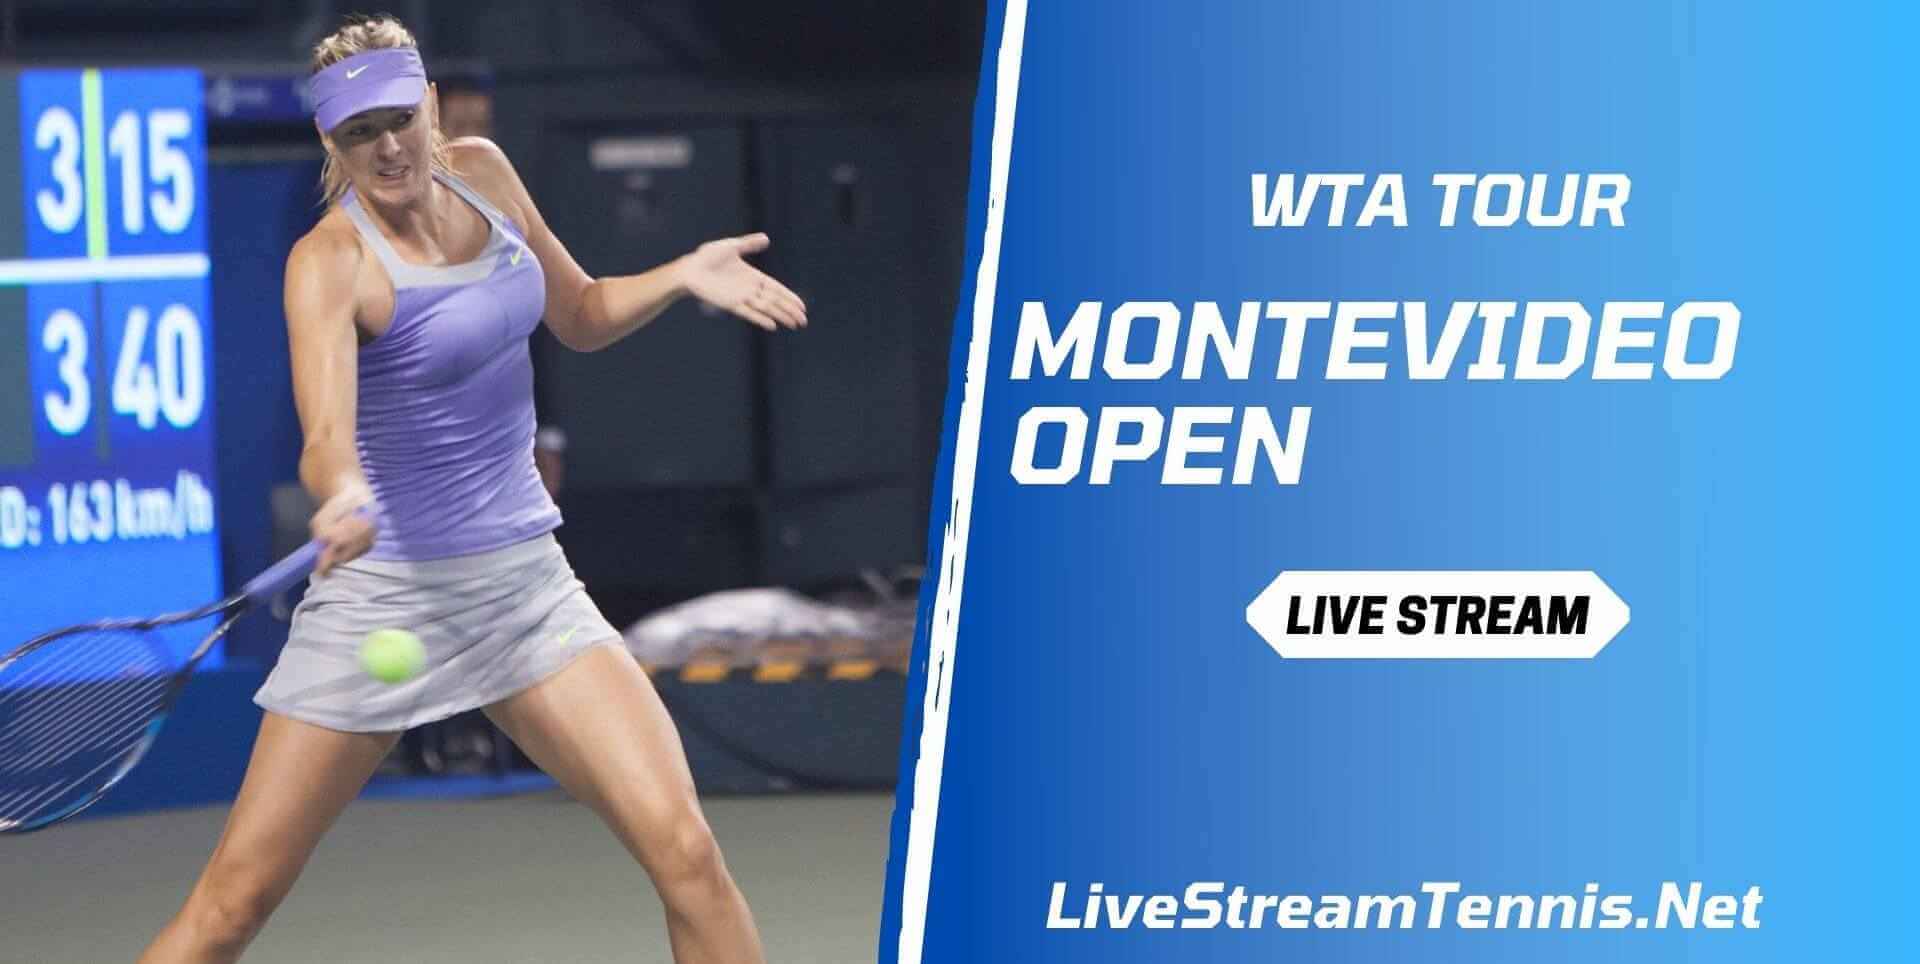 Montevideo Open Tennis Live Streaming